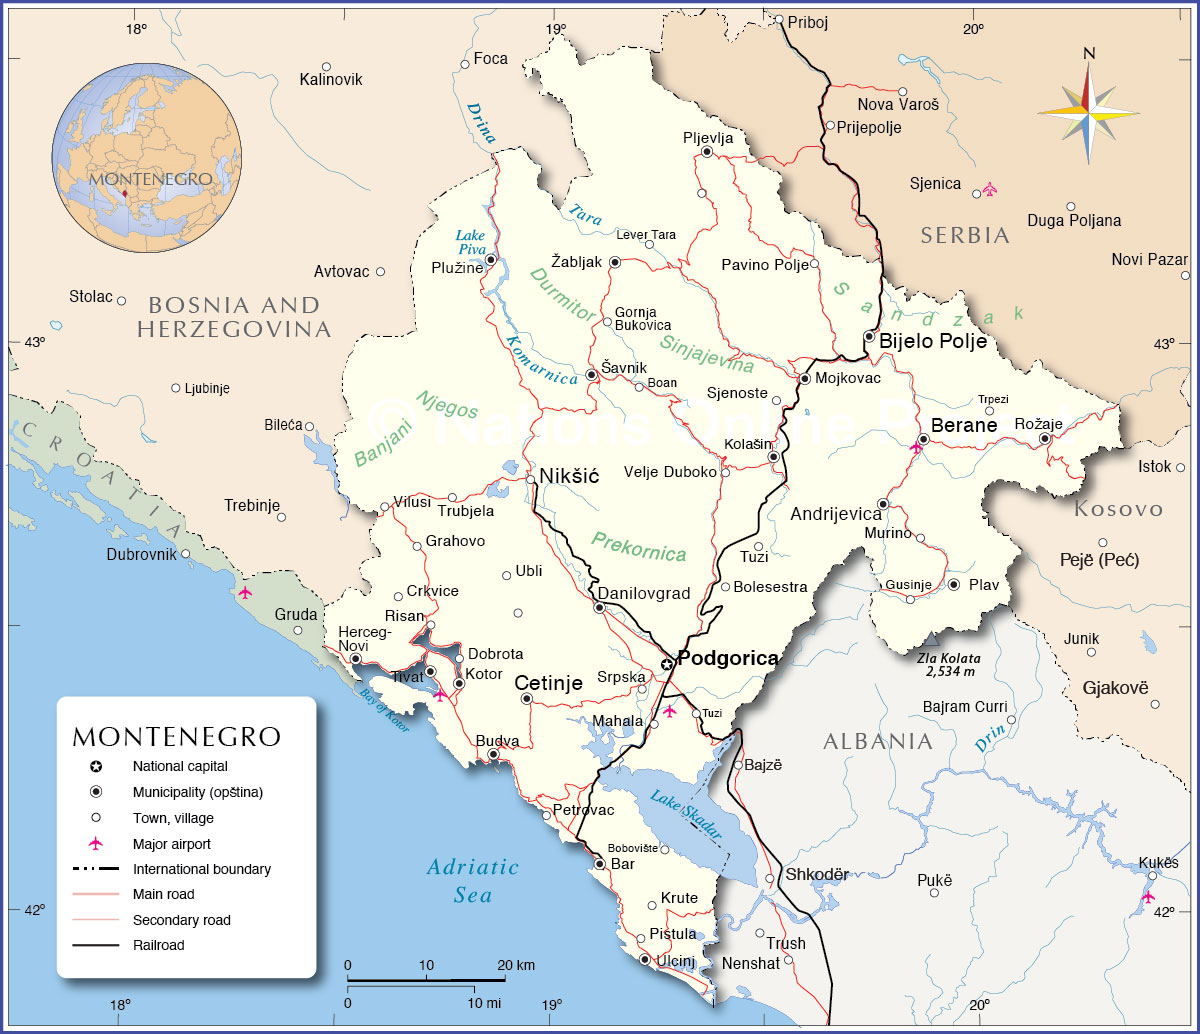 Political Map of Montenegro - Nations Online Project